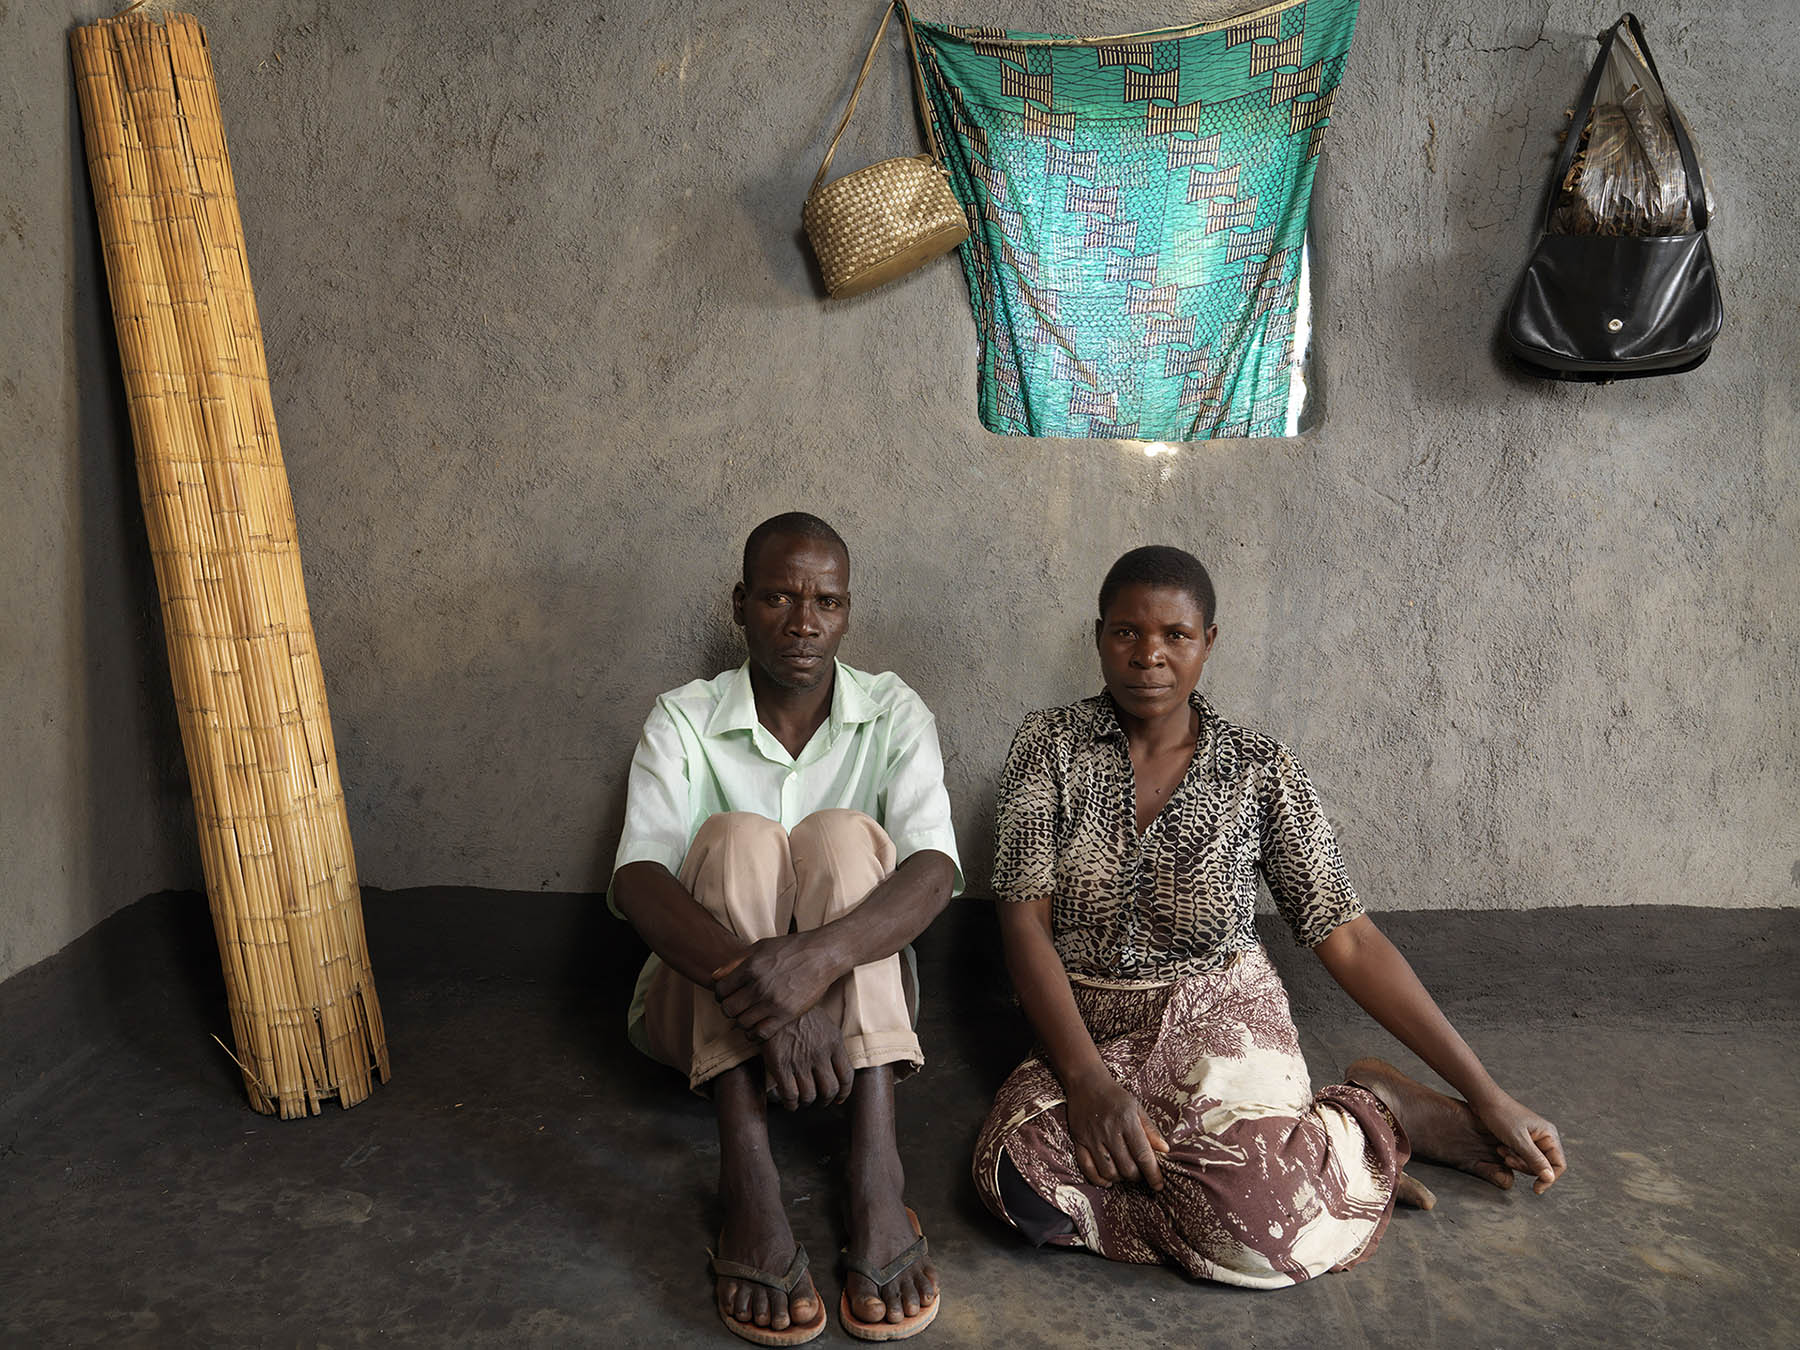 Malawi, Dickson village.  Matias Sadalaki (48) and wife Asnat (41), who  has diabetes. She gave birth to seven children: two died, one is married, four still live at home (but are in school now).